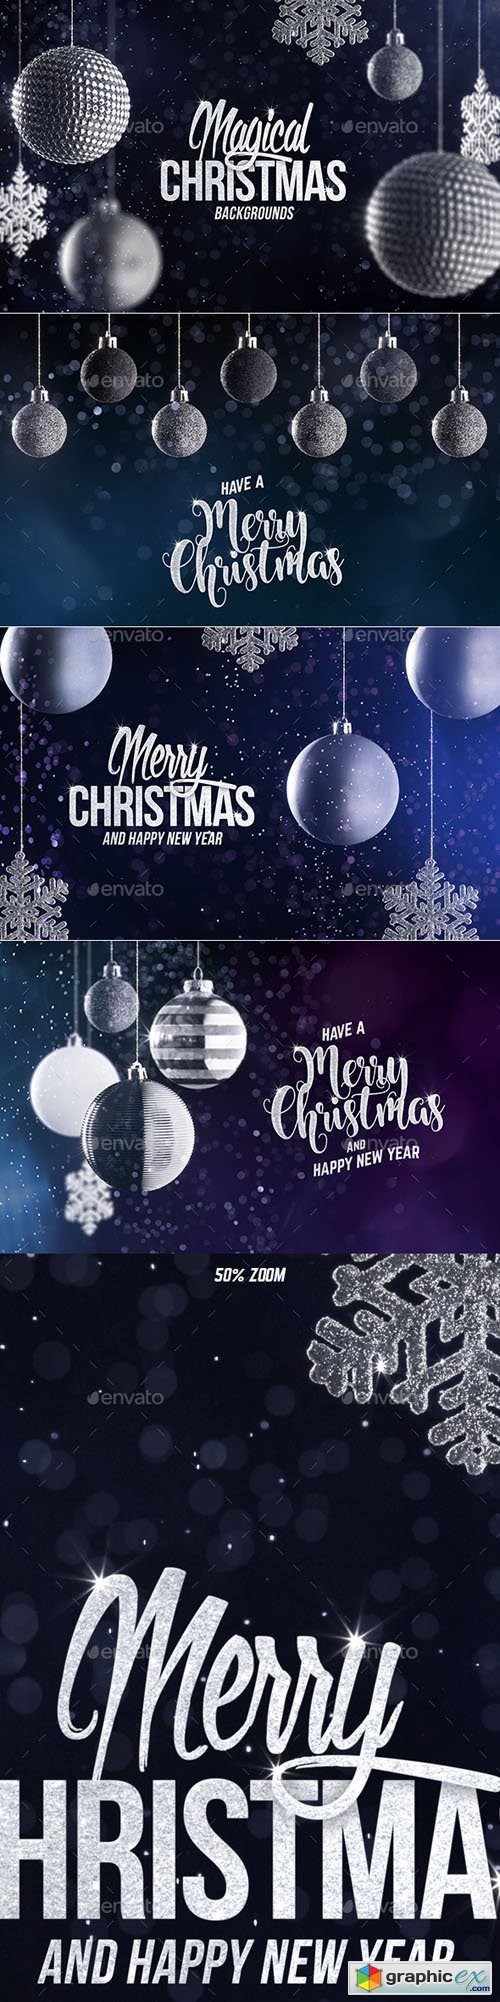 4 Christmas Backgrounds with Editable Text